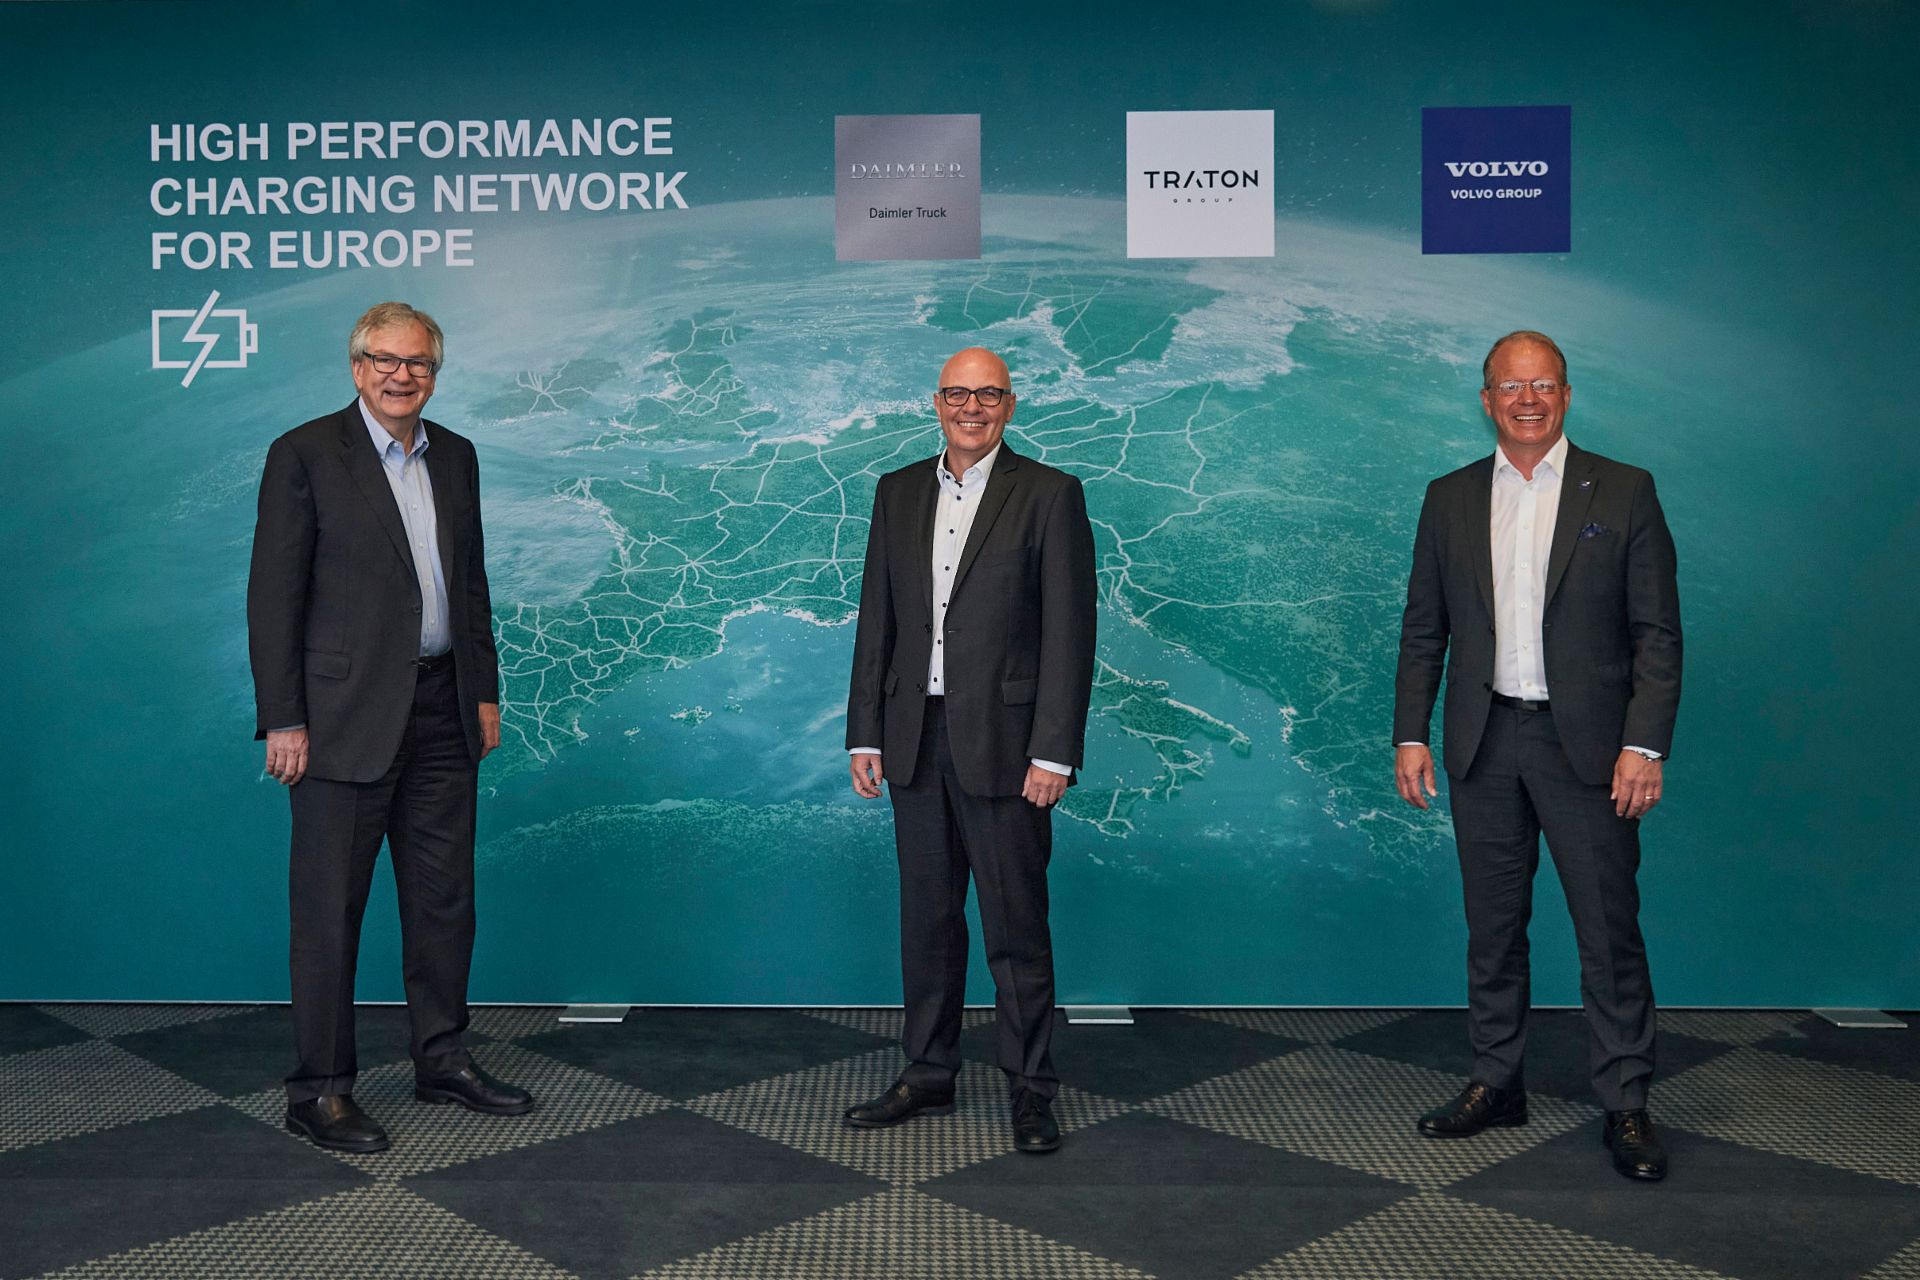 Image of Martin Daum, CEO Daimler Truck, Matthias Gründler, CEO TRATON GROUP and Martin Lundstedt, President and CEO Volvo Group